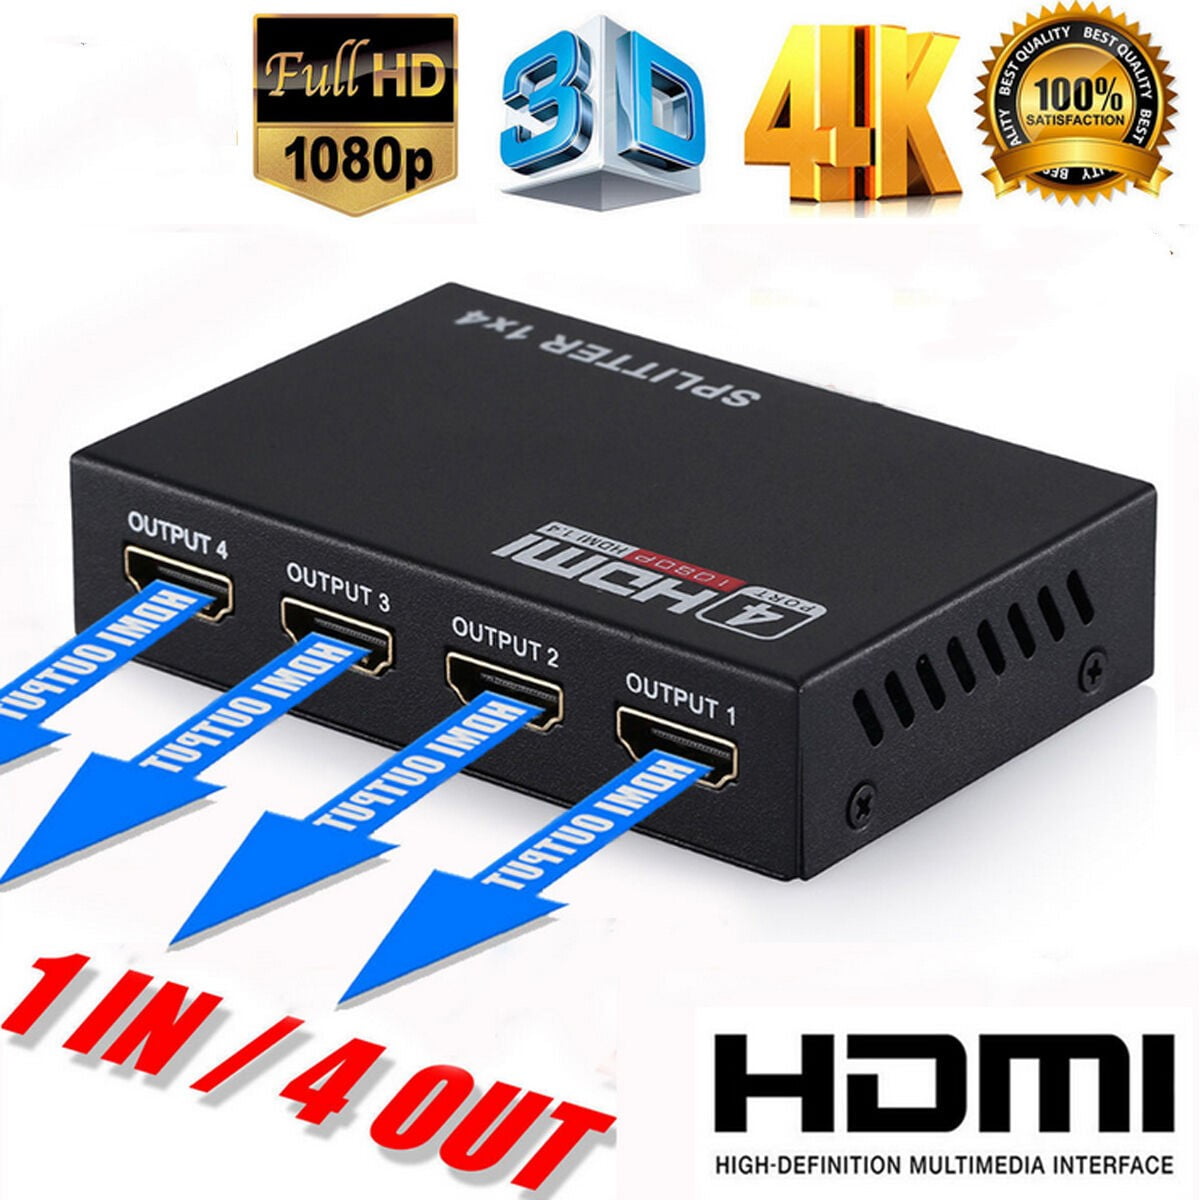 Splitter 1 in 3 4 Out,V1.4 Powered 1x4 Ports Box Supports 4K@30Hz Full Ultra HD 1080P and 3D Compatible with PC STB Xbox PS4 PS3 Fire Stick Roku Blu-Ray Player HDTV -